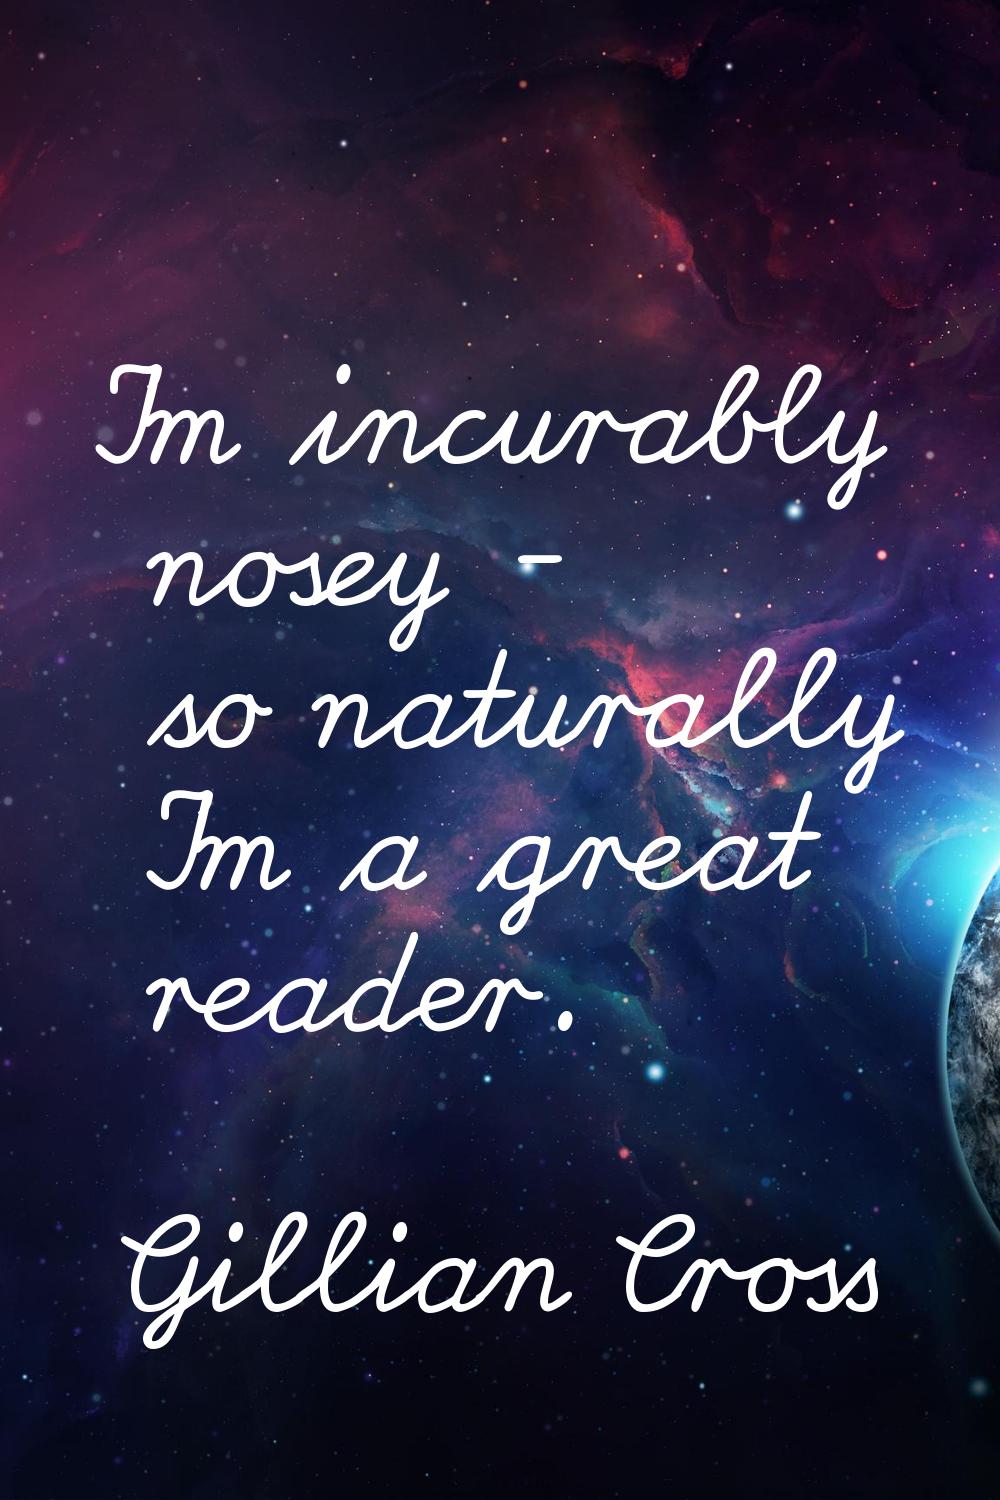 I'm incurably nosey - so naturally I'm a great reader.